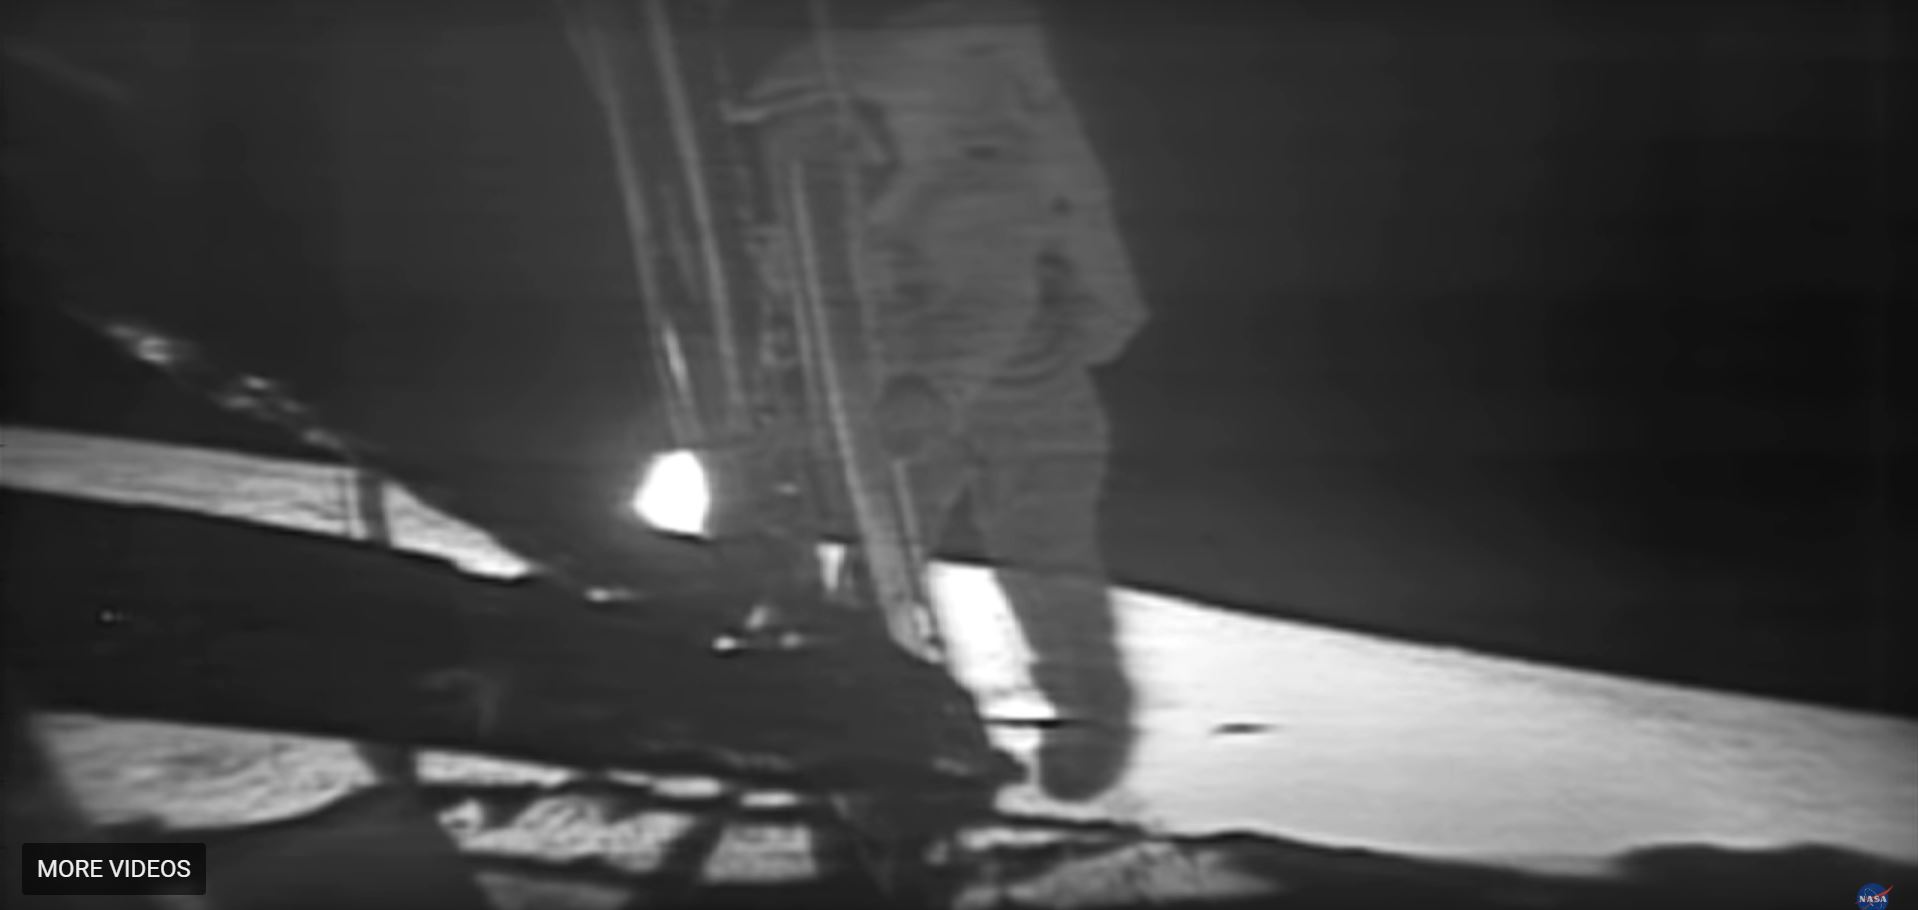 A remote camera captured Armstrong's dramatic first step onto the Moon's surface.